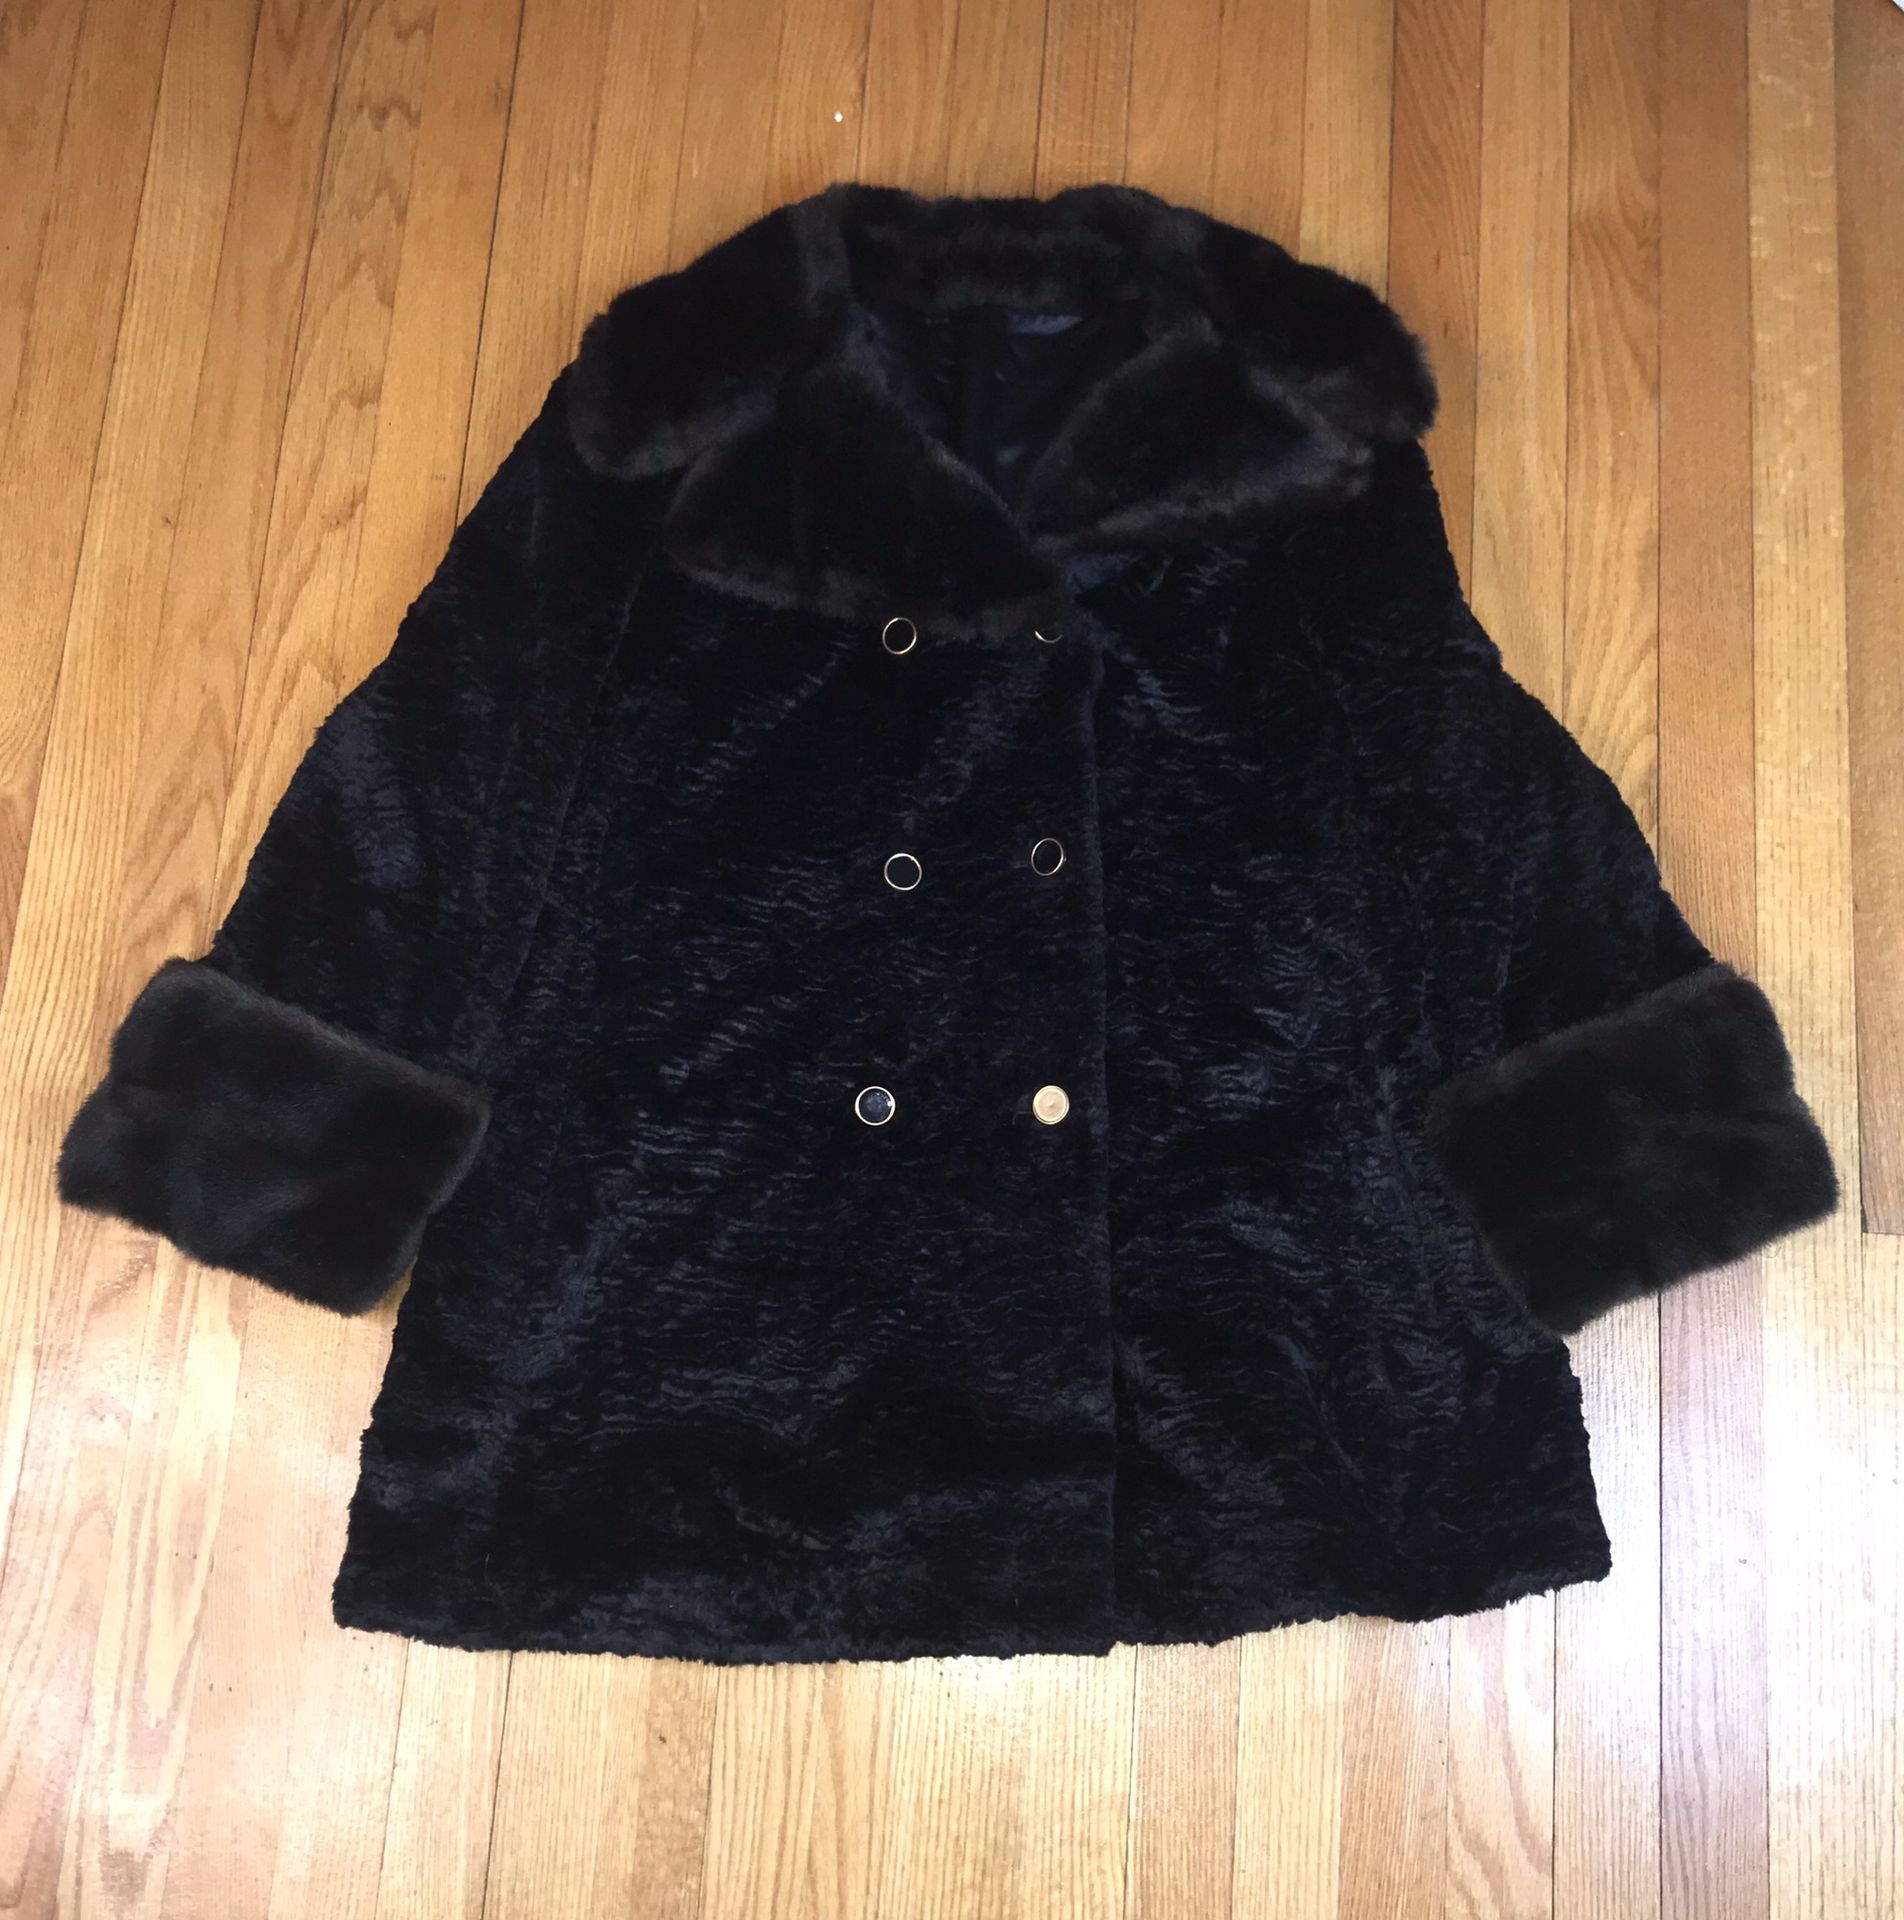 Vintage Aristocrat Genuine French Simulation Fur faux Lytton's Sycamore Brown Coat Gently used * Disclaimer * One button is missing a black top